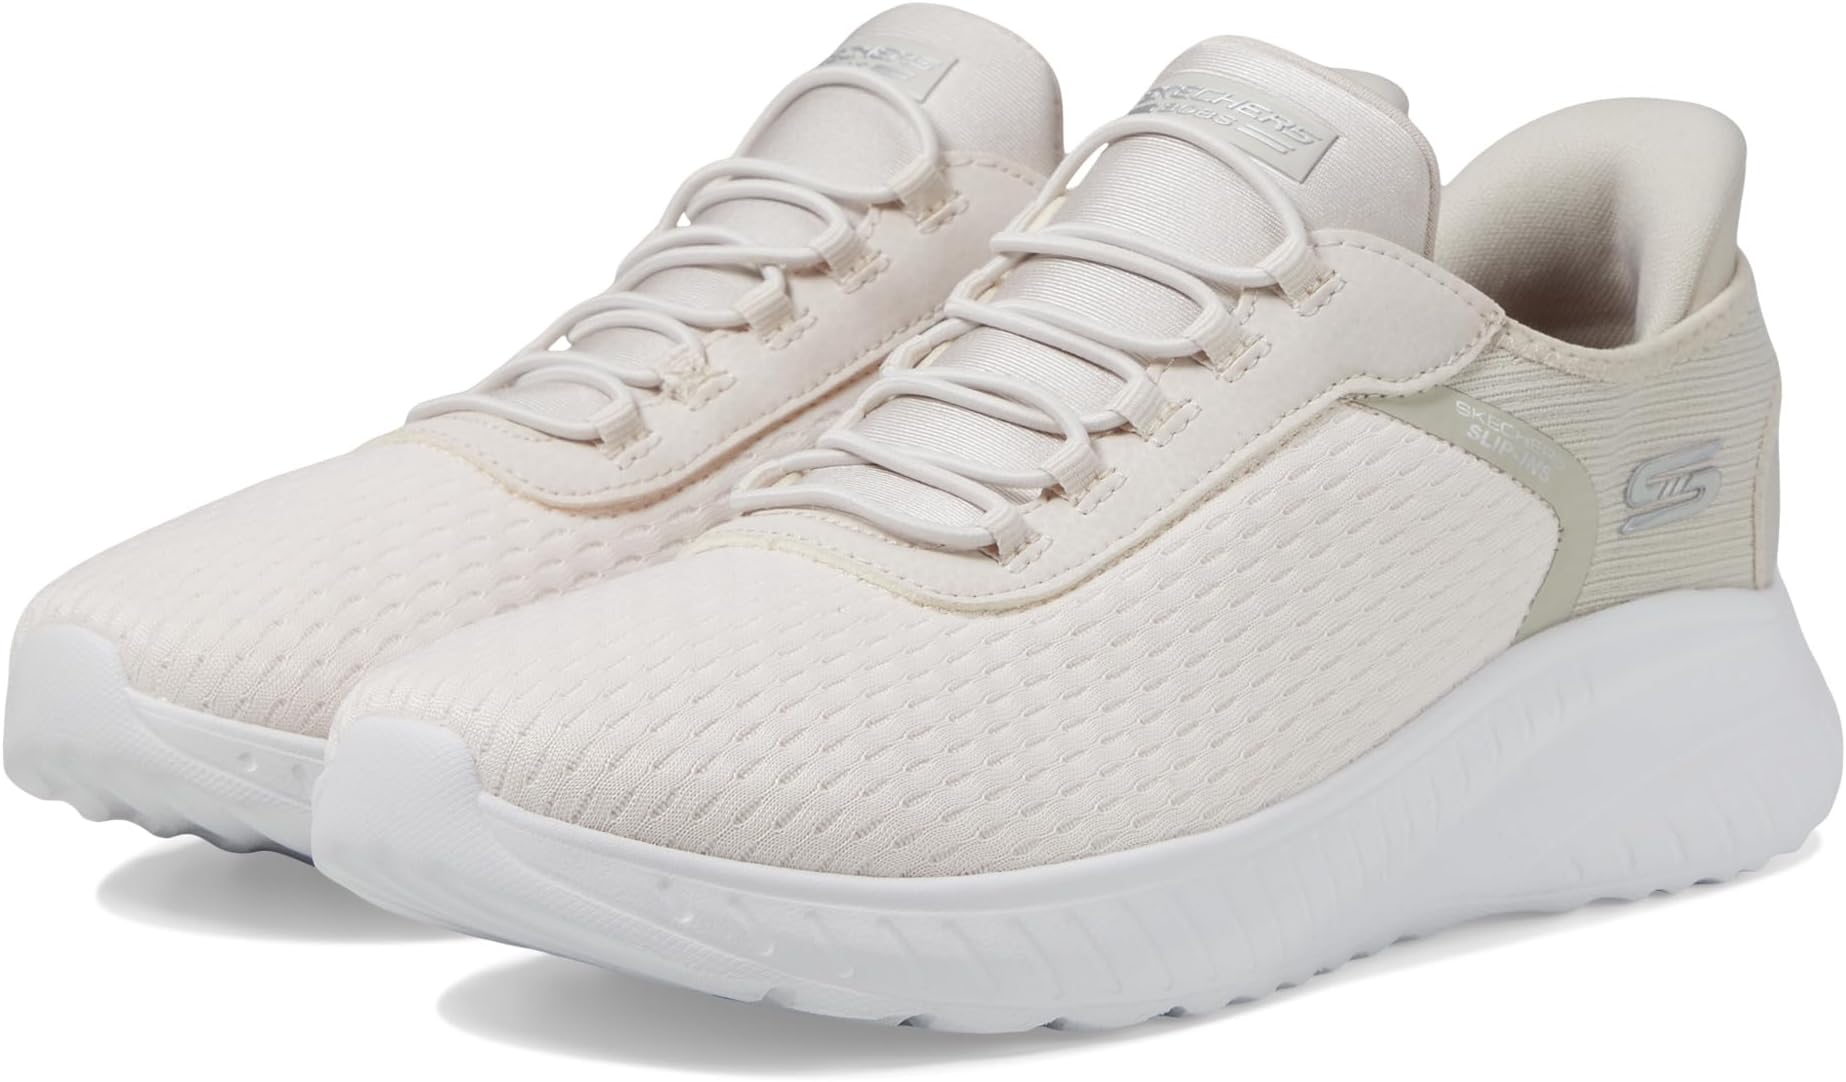 Кроссовки Bobs Squad Chaos - In Color Hands Free Slip-Ins BOBS from SKECHERS, цвет Off-White кроссовки bobs from skechers bobs squad chaos face off цвет nude